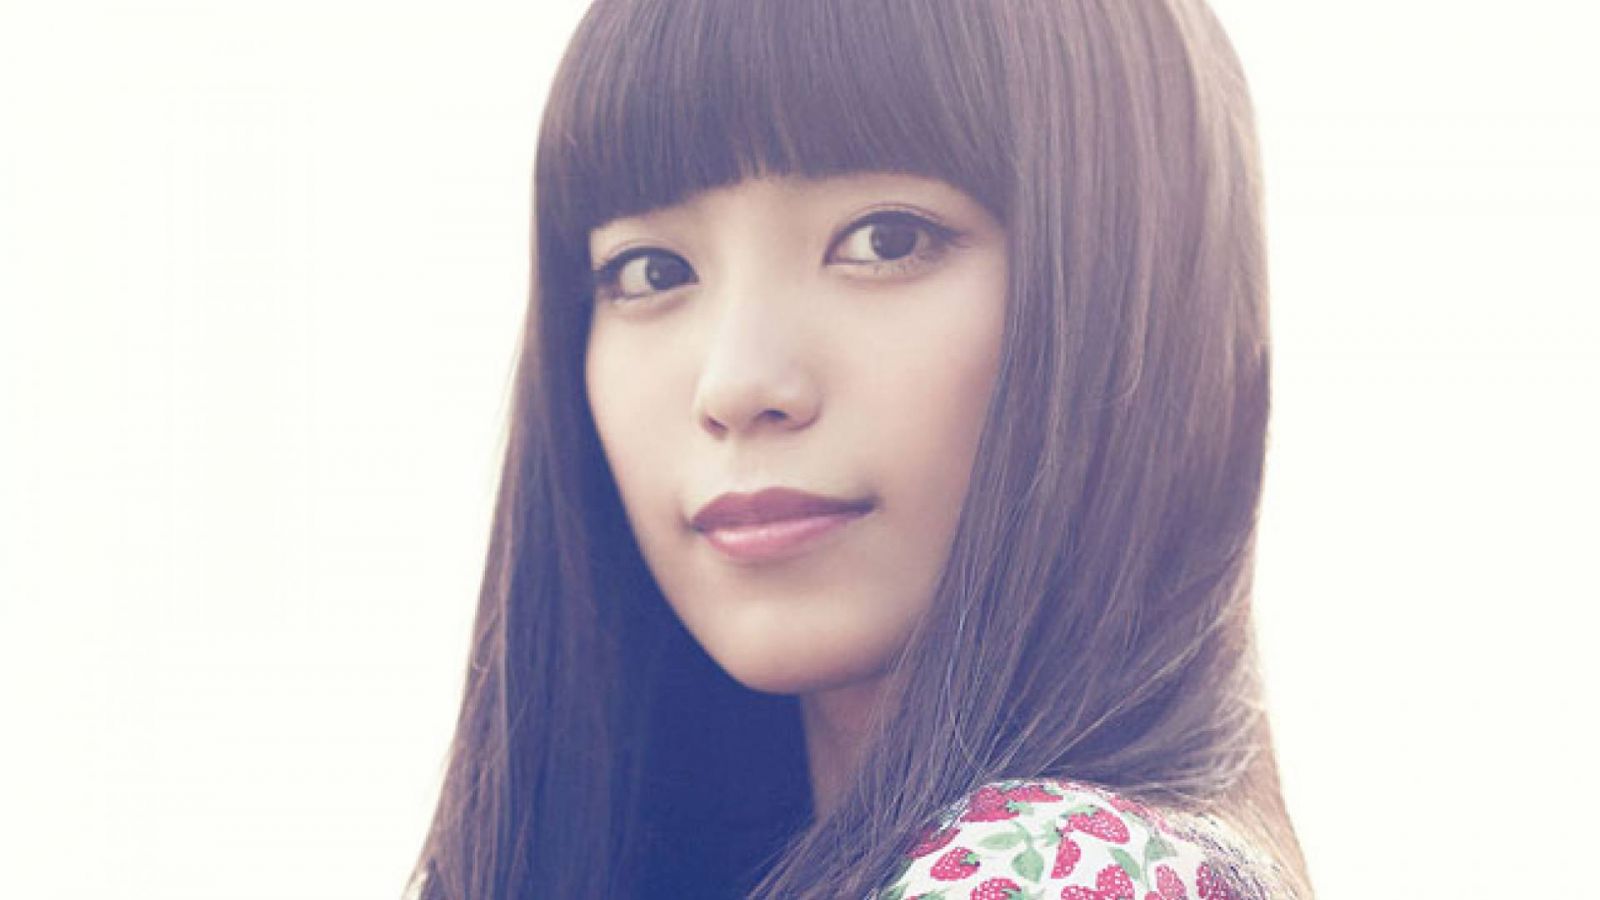 miwa - fighting-Φ-girls © 2013 Sony Music Records Inc. Provided by E-TALENTBANK.